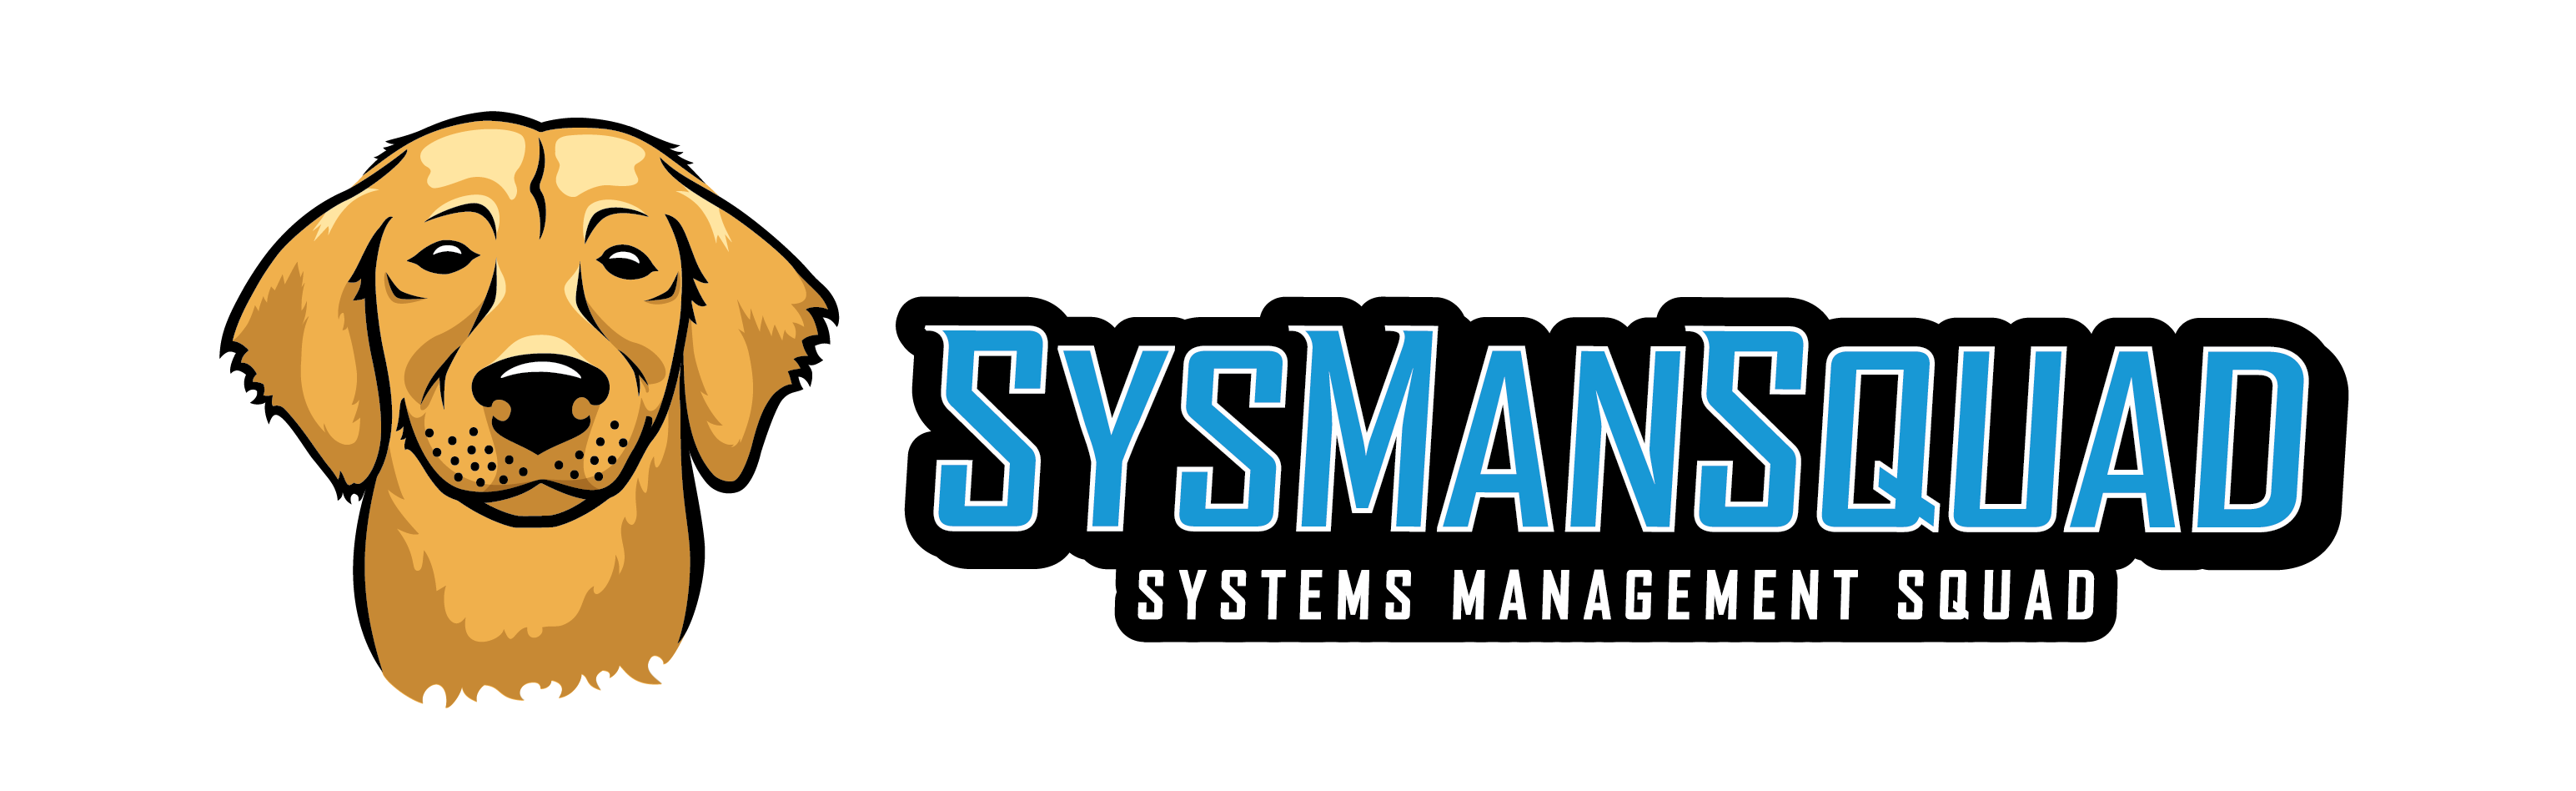 Systems Management Squad